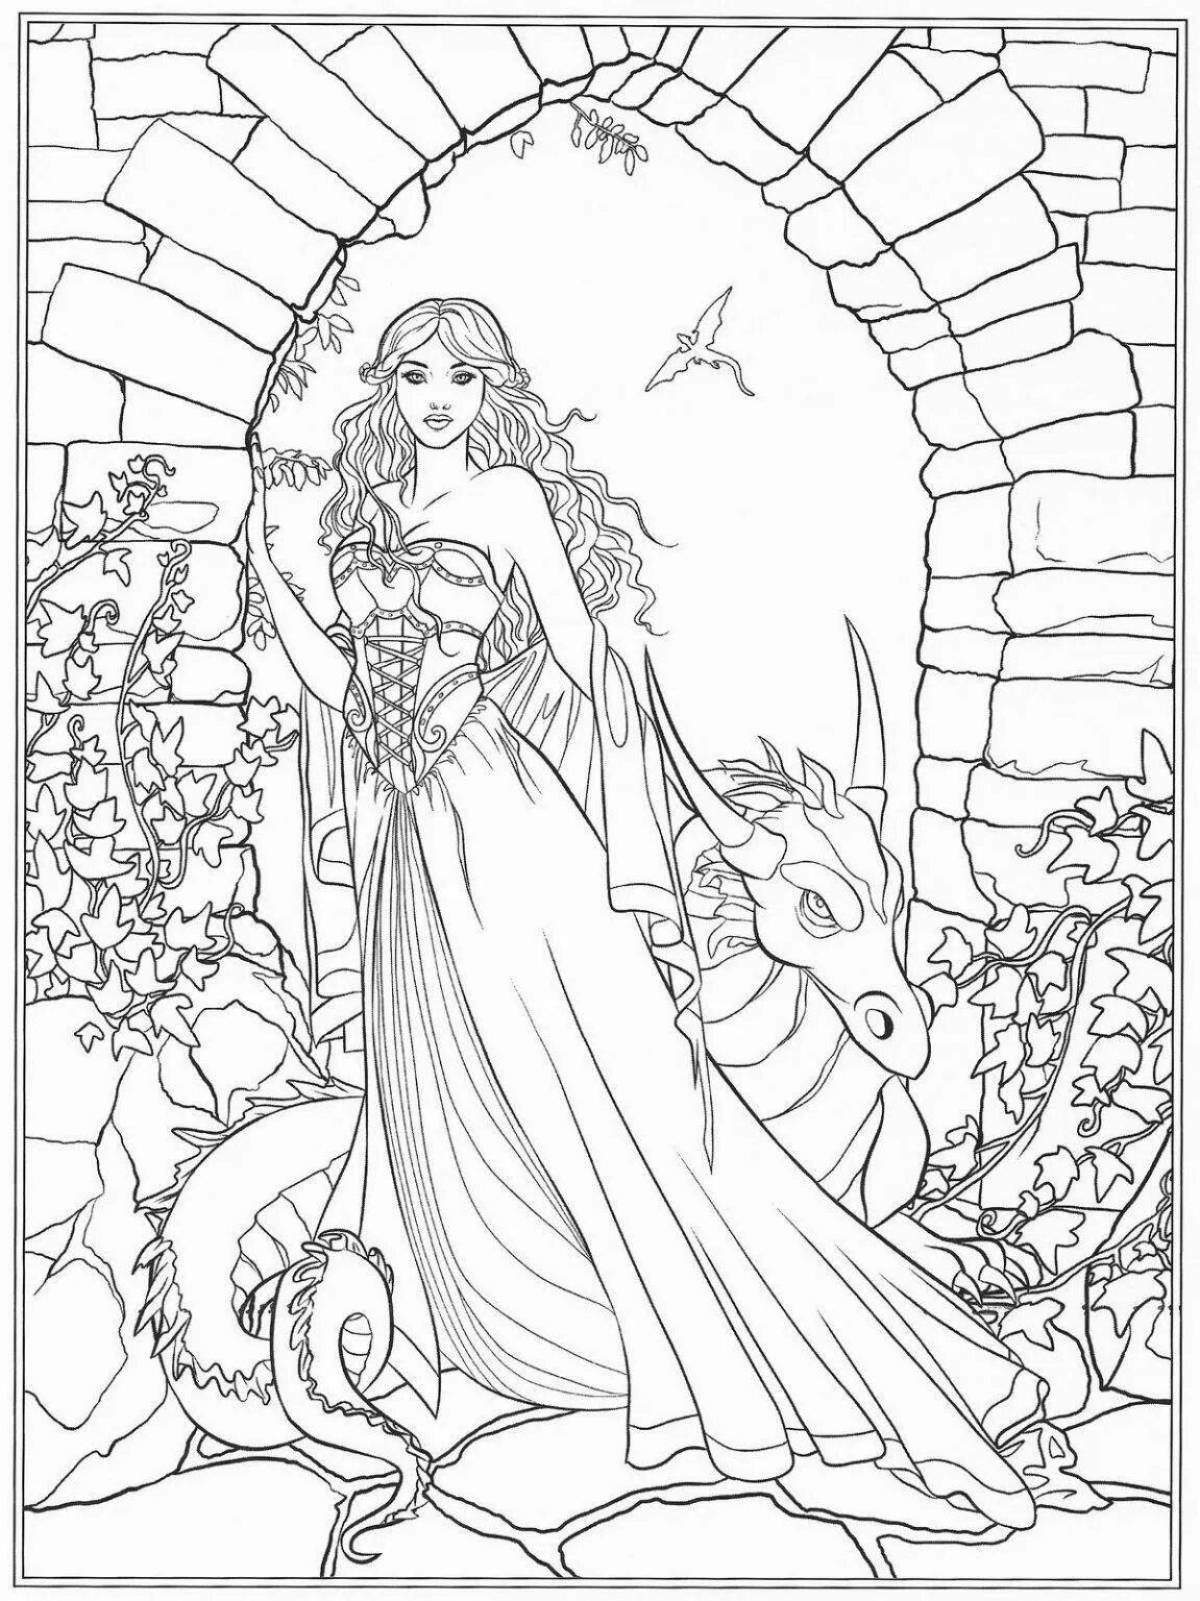 Exalted princess coloring book